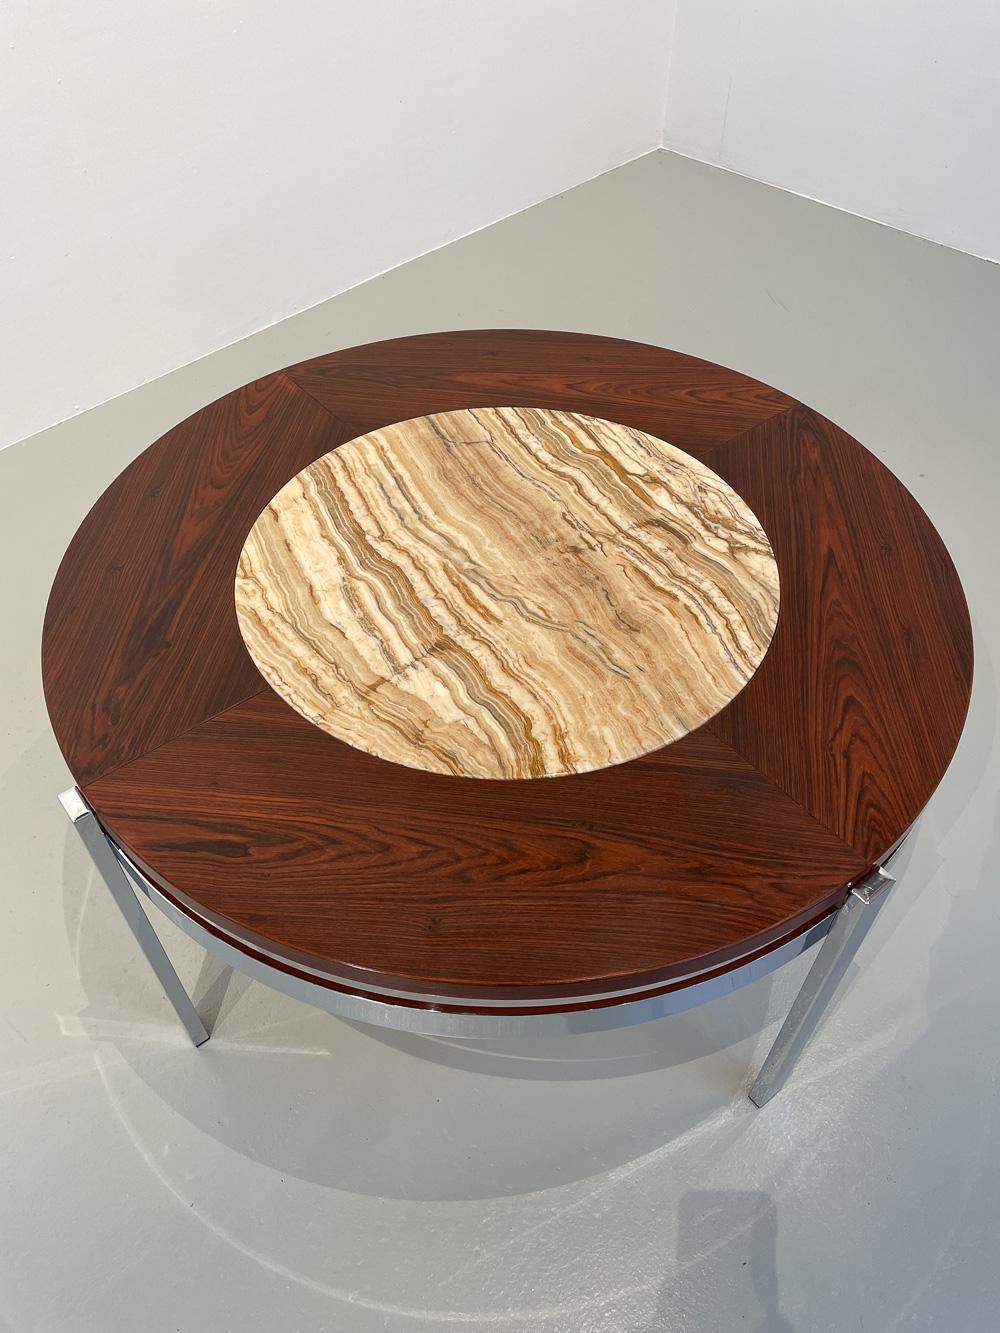 Danish Modern Round Rosewood and Marble Coffee Table by Bendixen Design, 1970s. For Sale 9